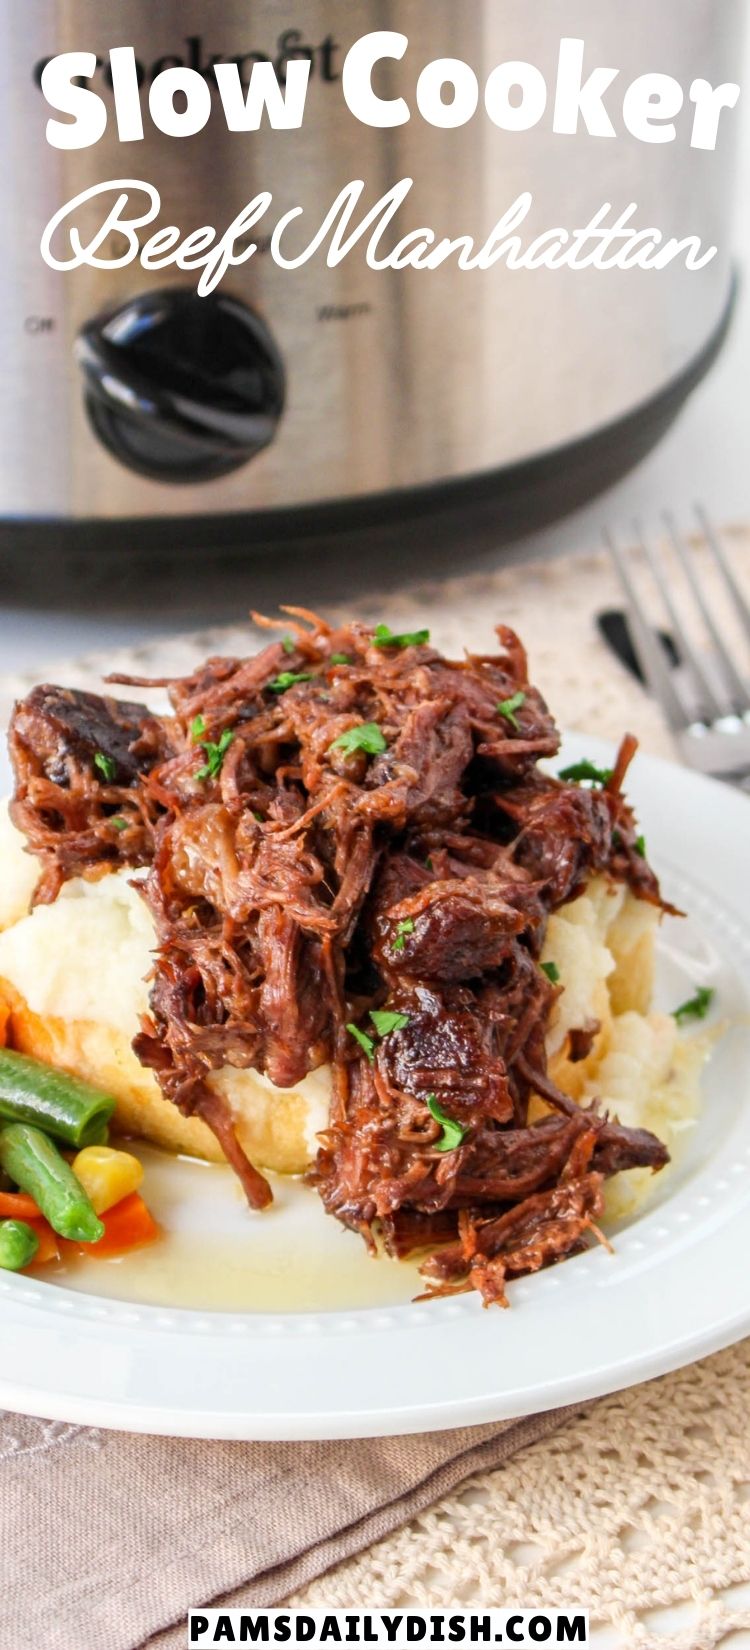 Beef Manhattan is tender and juicy beef served on top of a bed of creamy mashed potatoes as an open face sandwich. A delicious meal. via @skinnydesserts